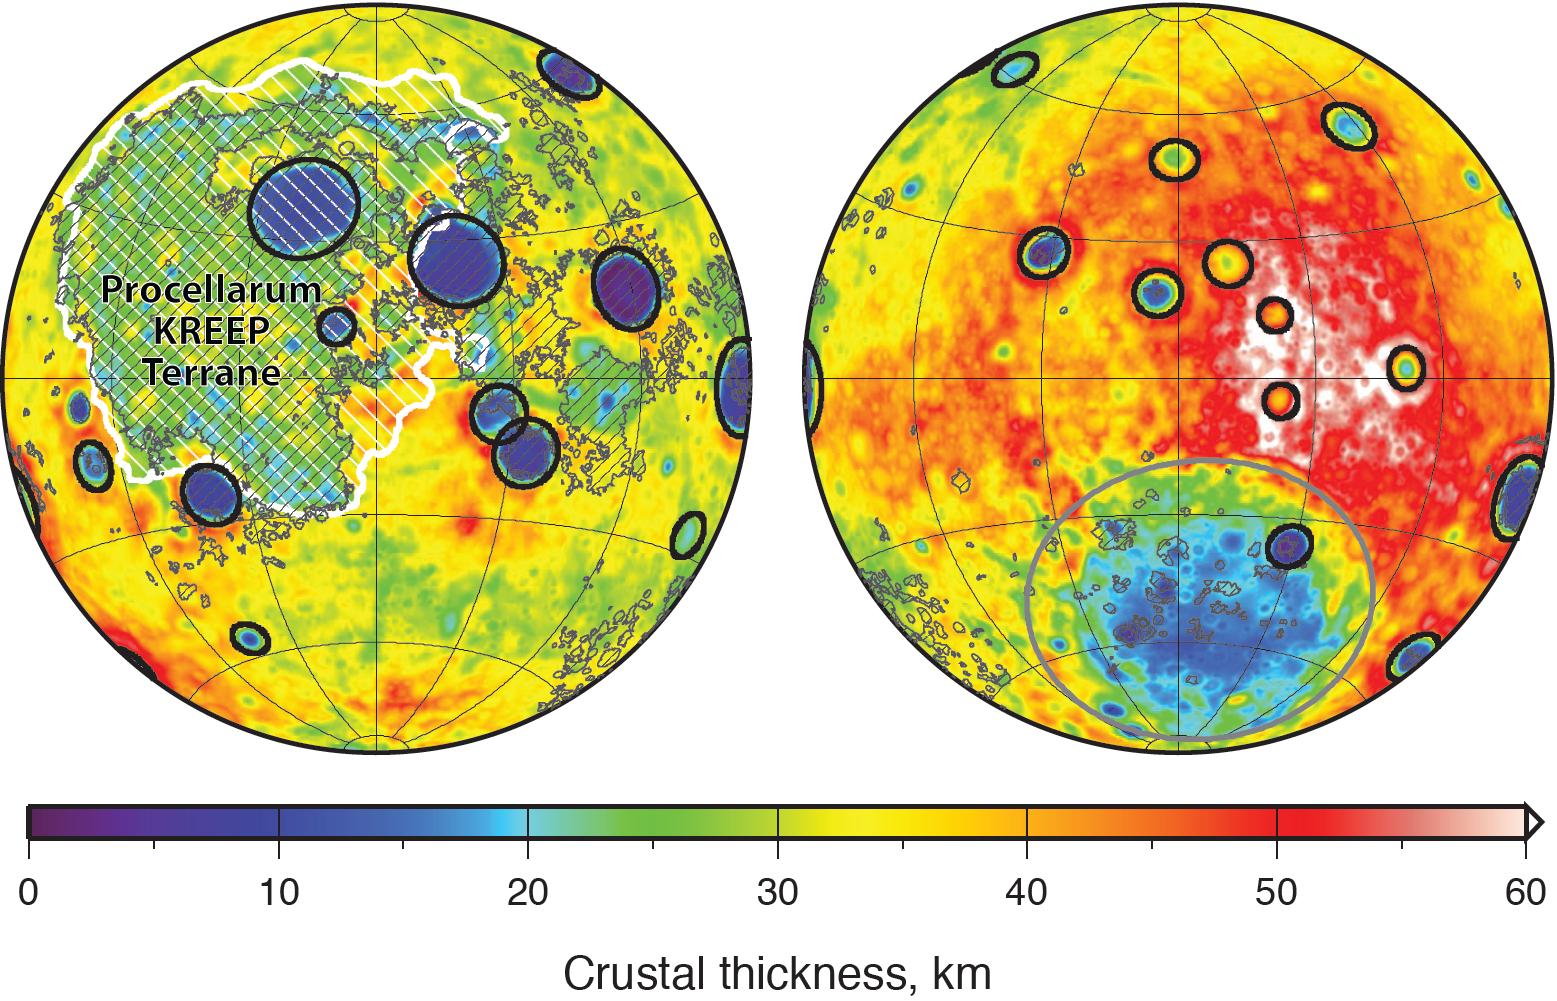 Heat map of crustal thickness of the moon